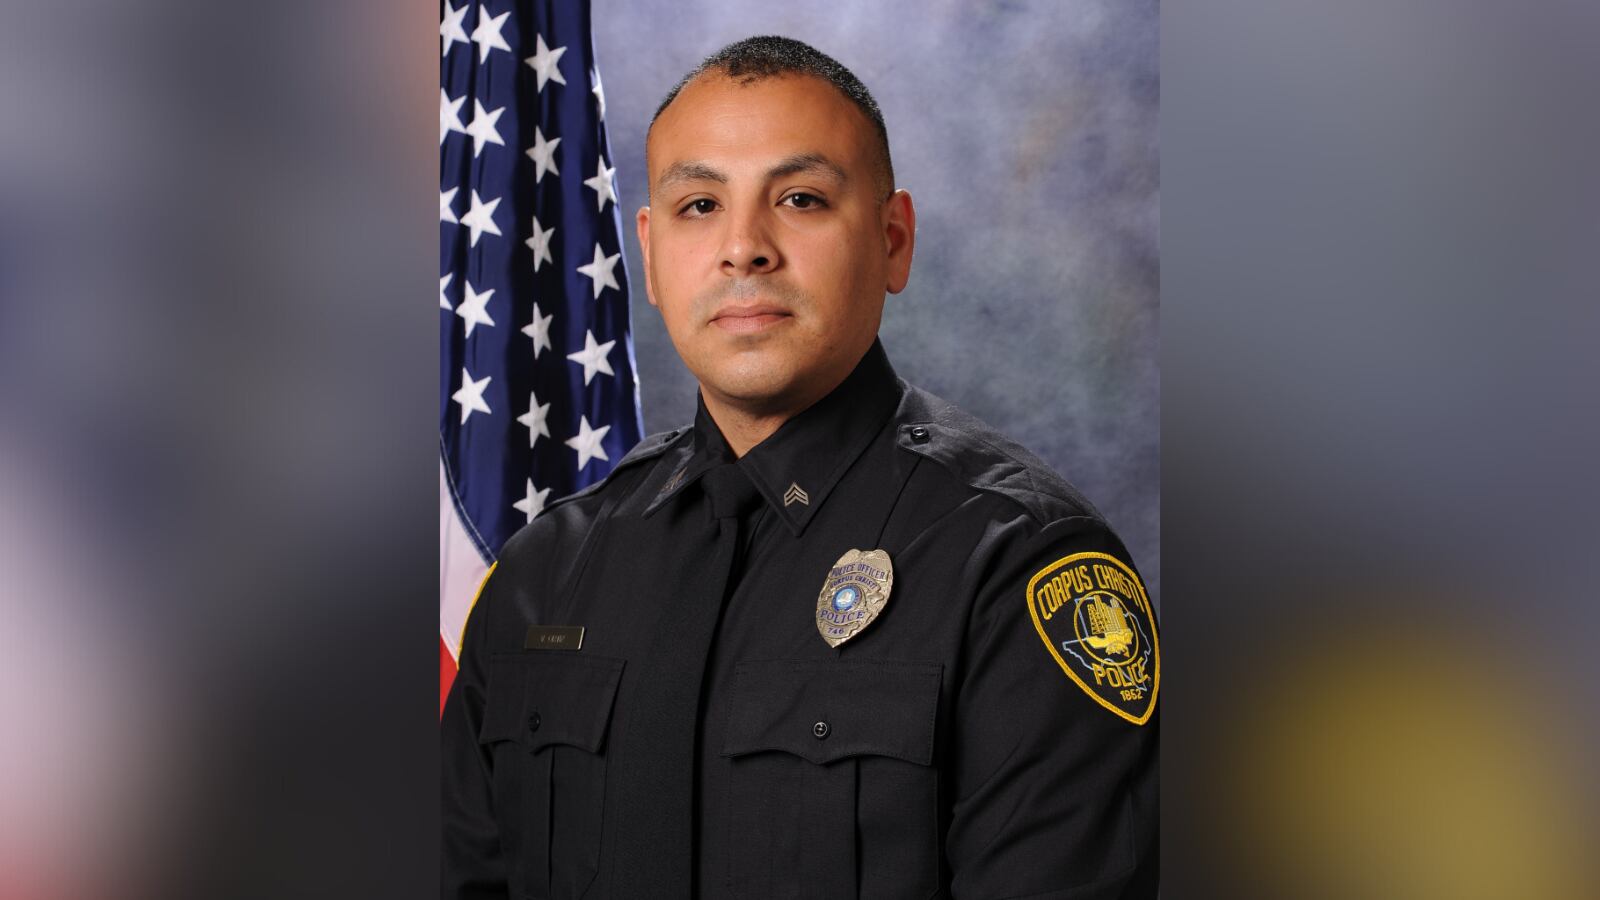 The Corpus Christi Police Department reported the death of Officer Vicente Ortiz, who was...